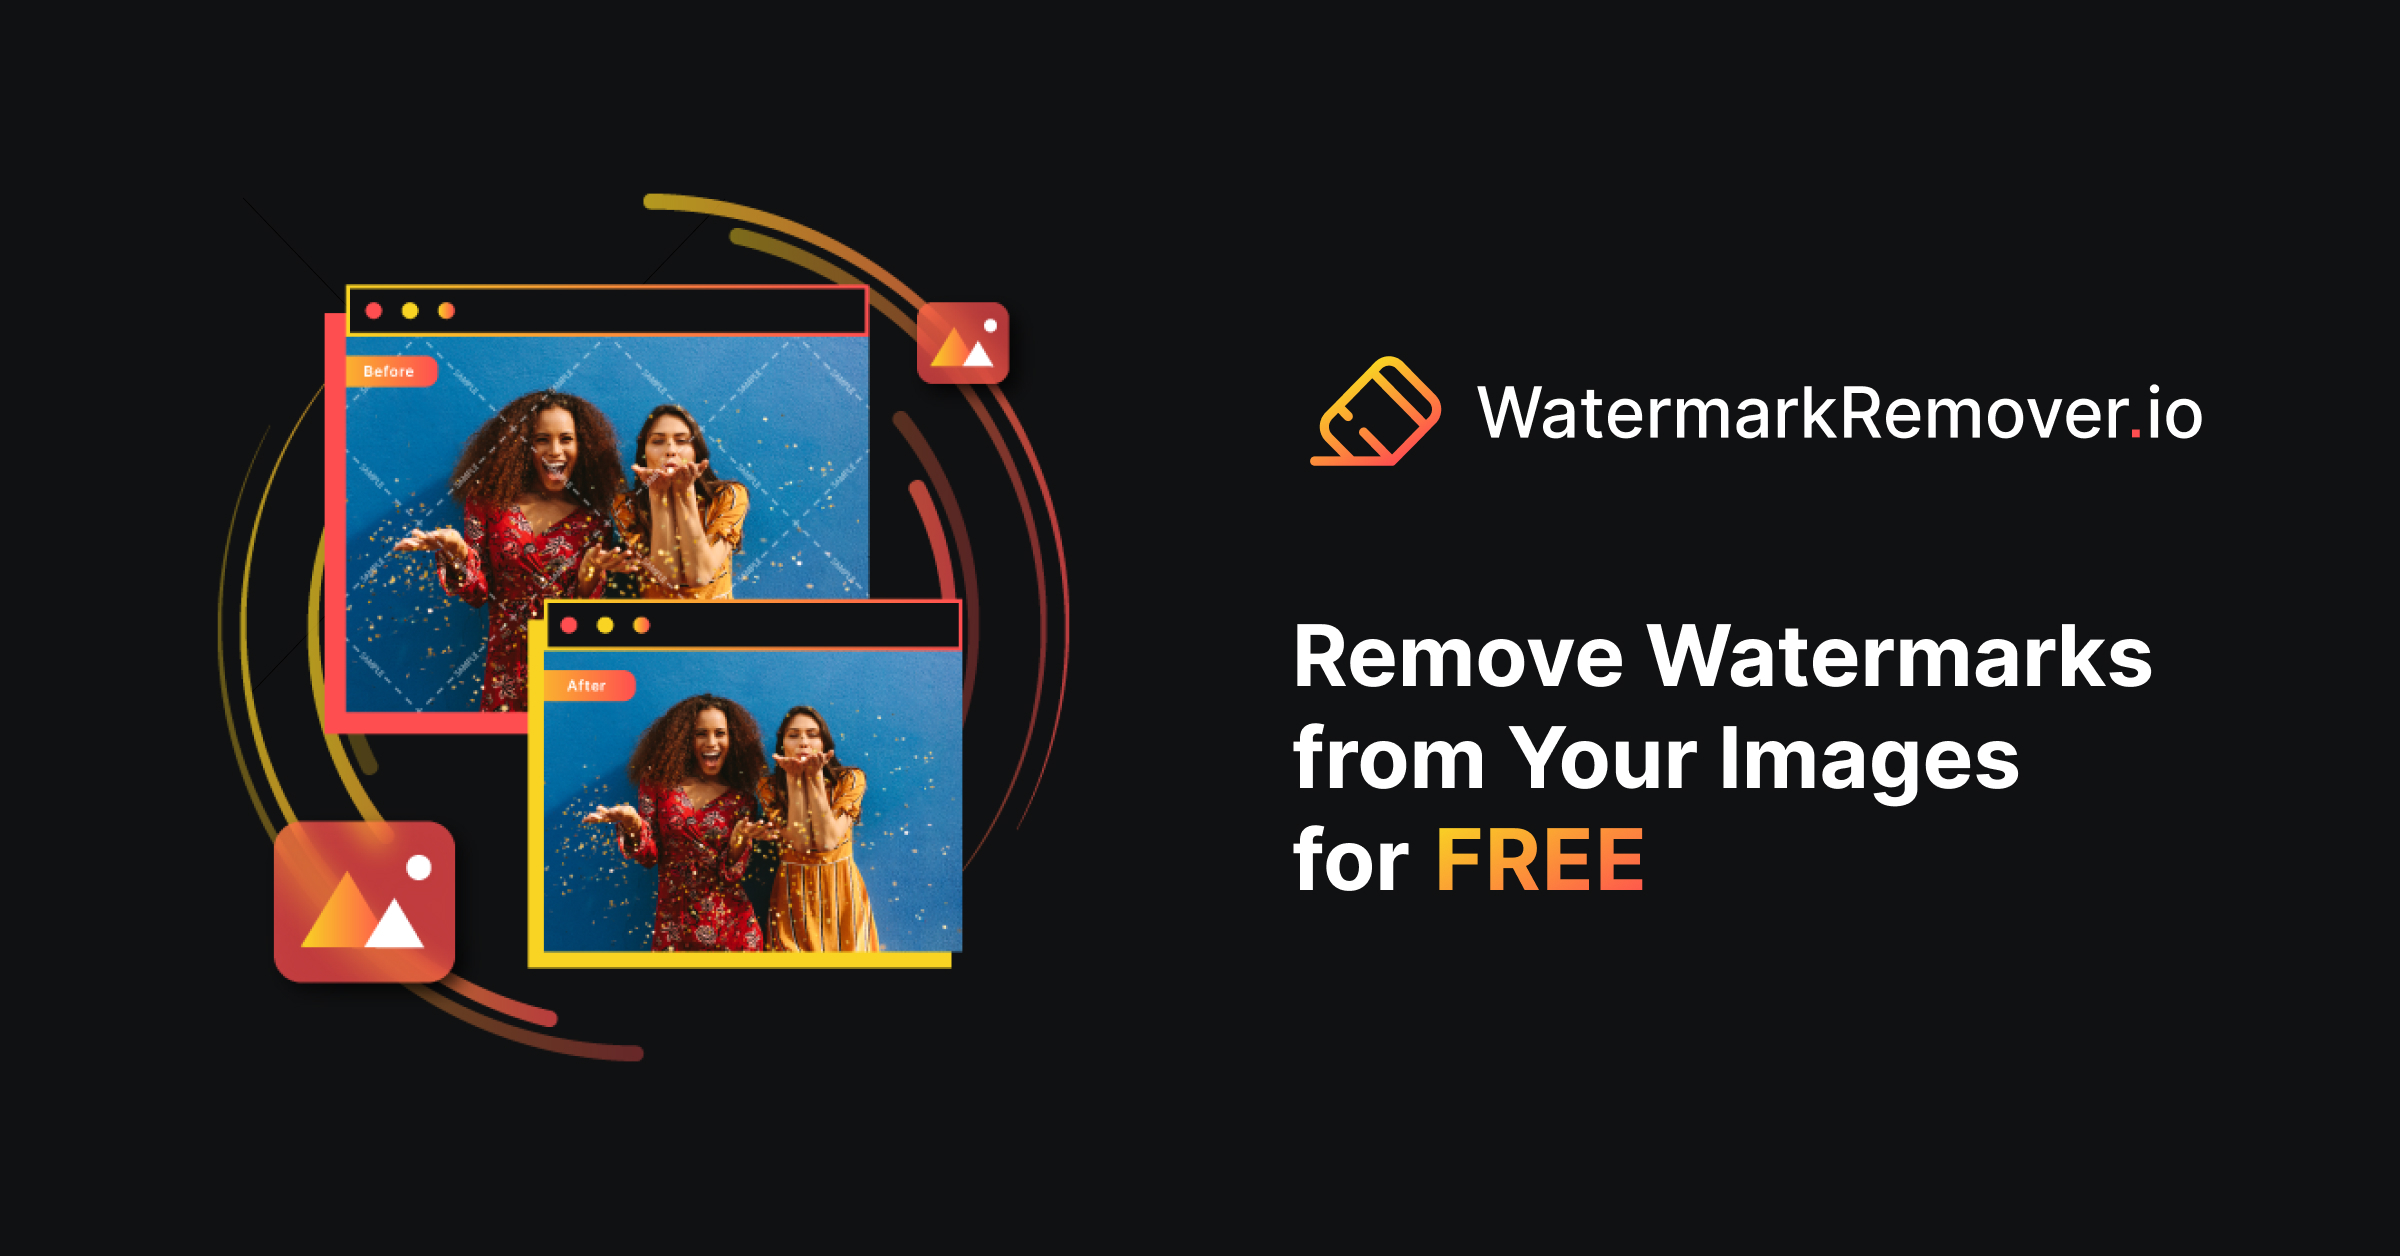 Watermark Remover - Use AI to remove watermarks from an image